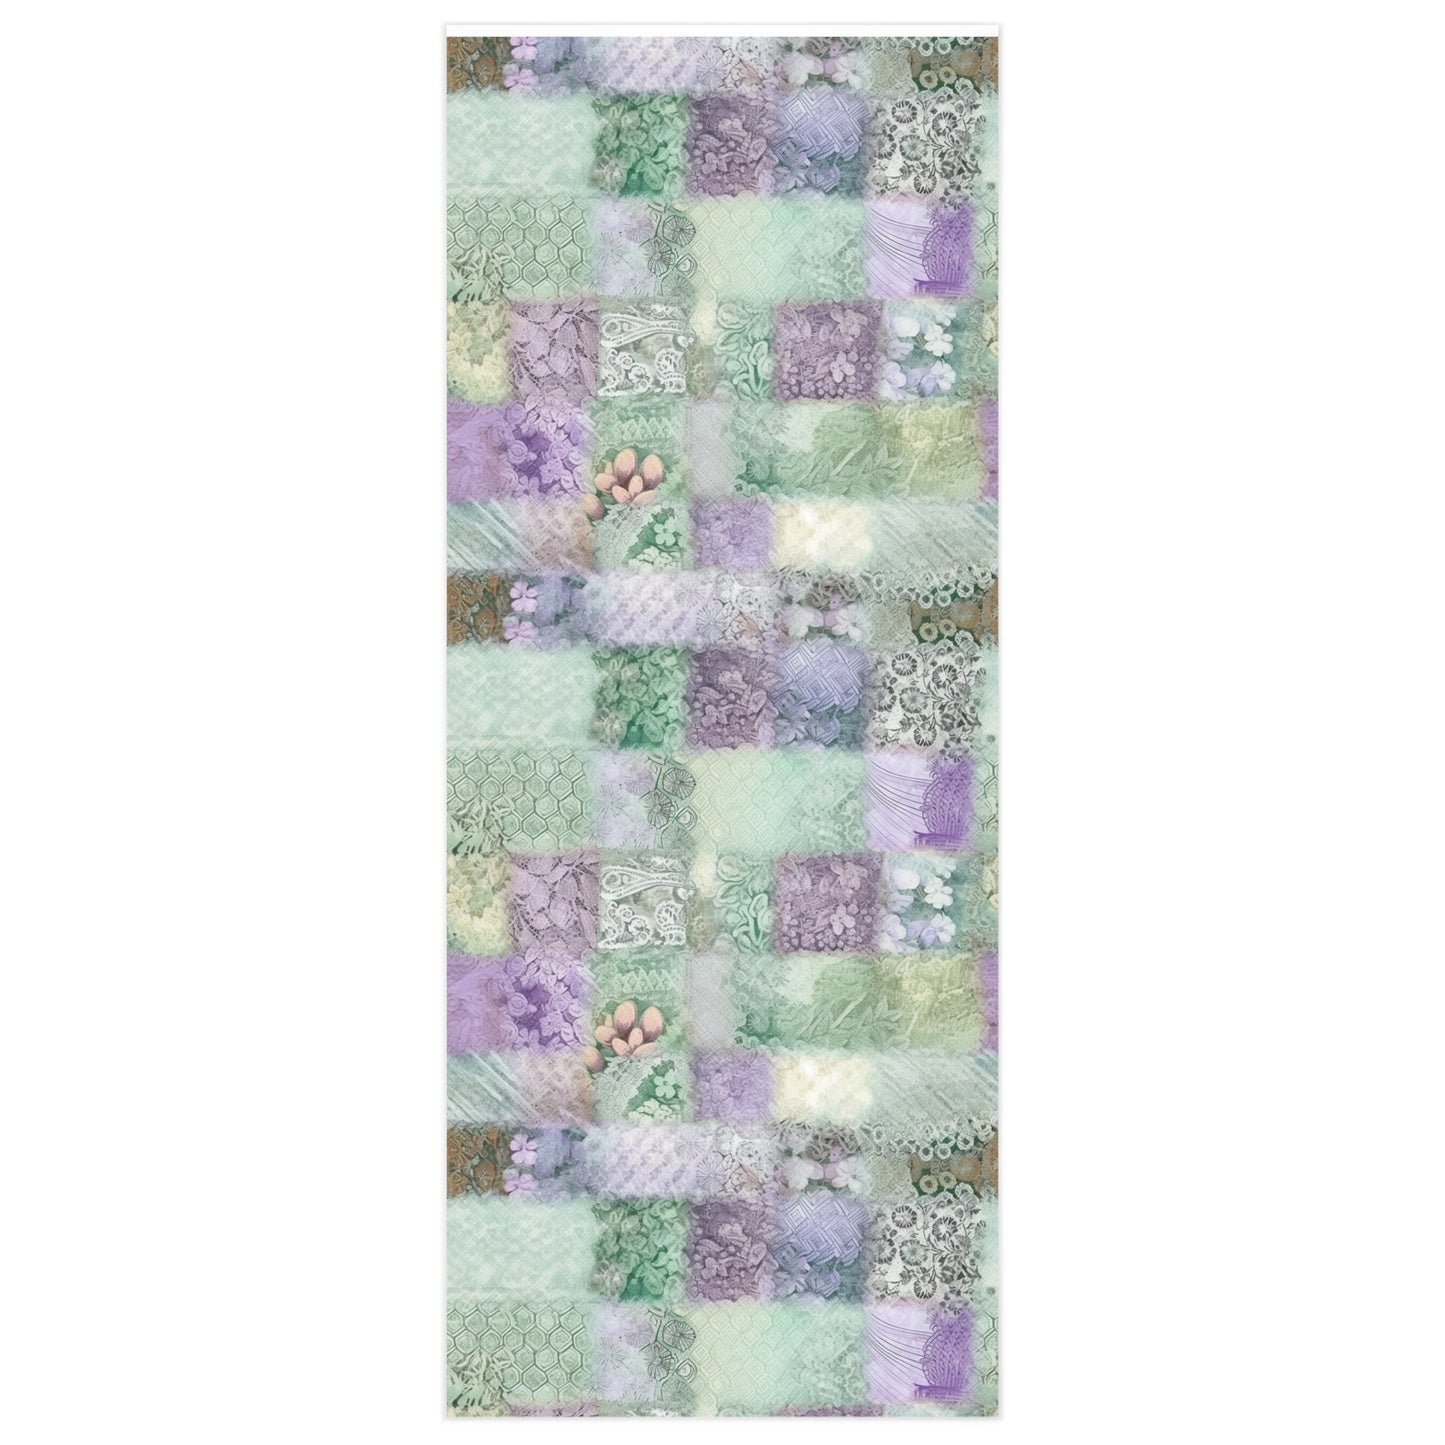 Medley Patchwork - Muted Pastels, Gingham & Lace, Boho Paisley Mix, Quilted Aesthetic Design - Wrapping Paper